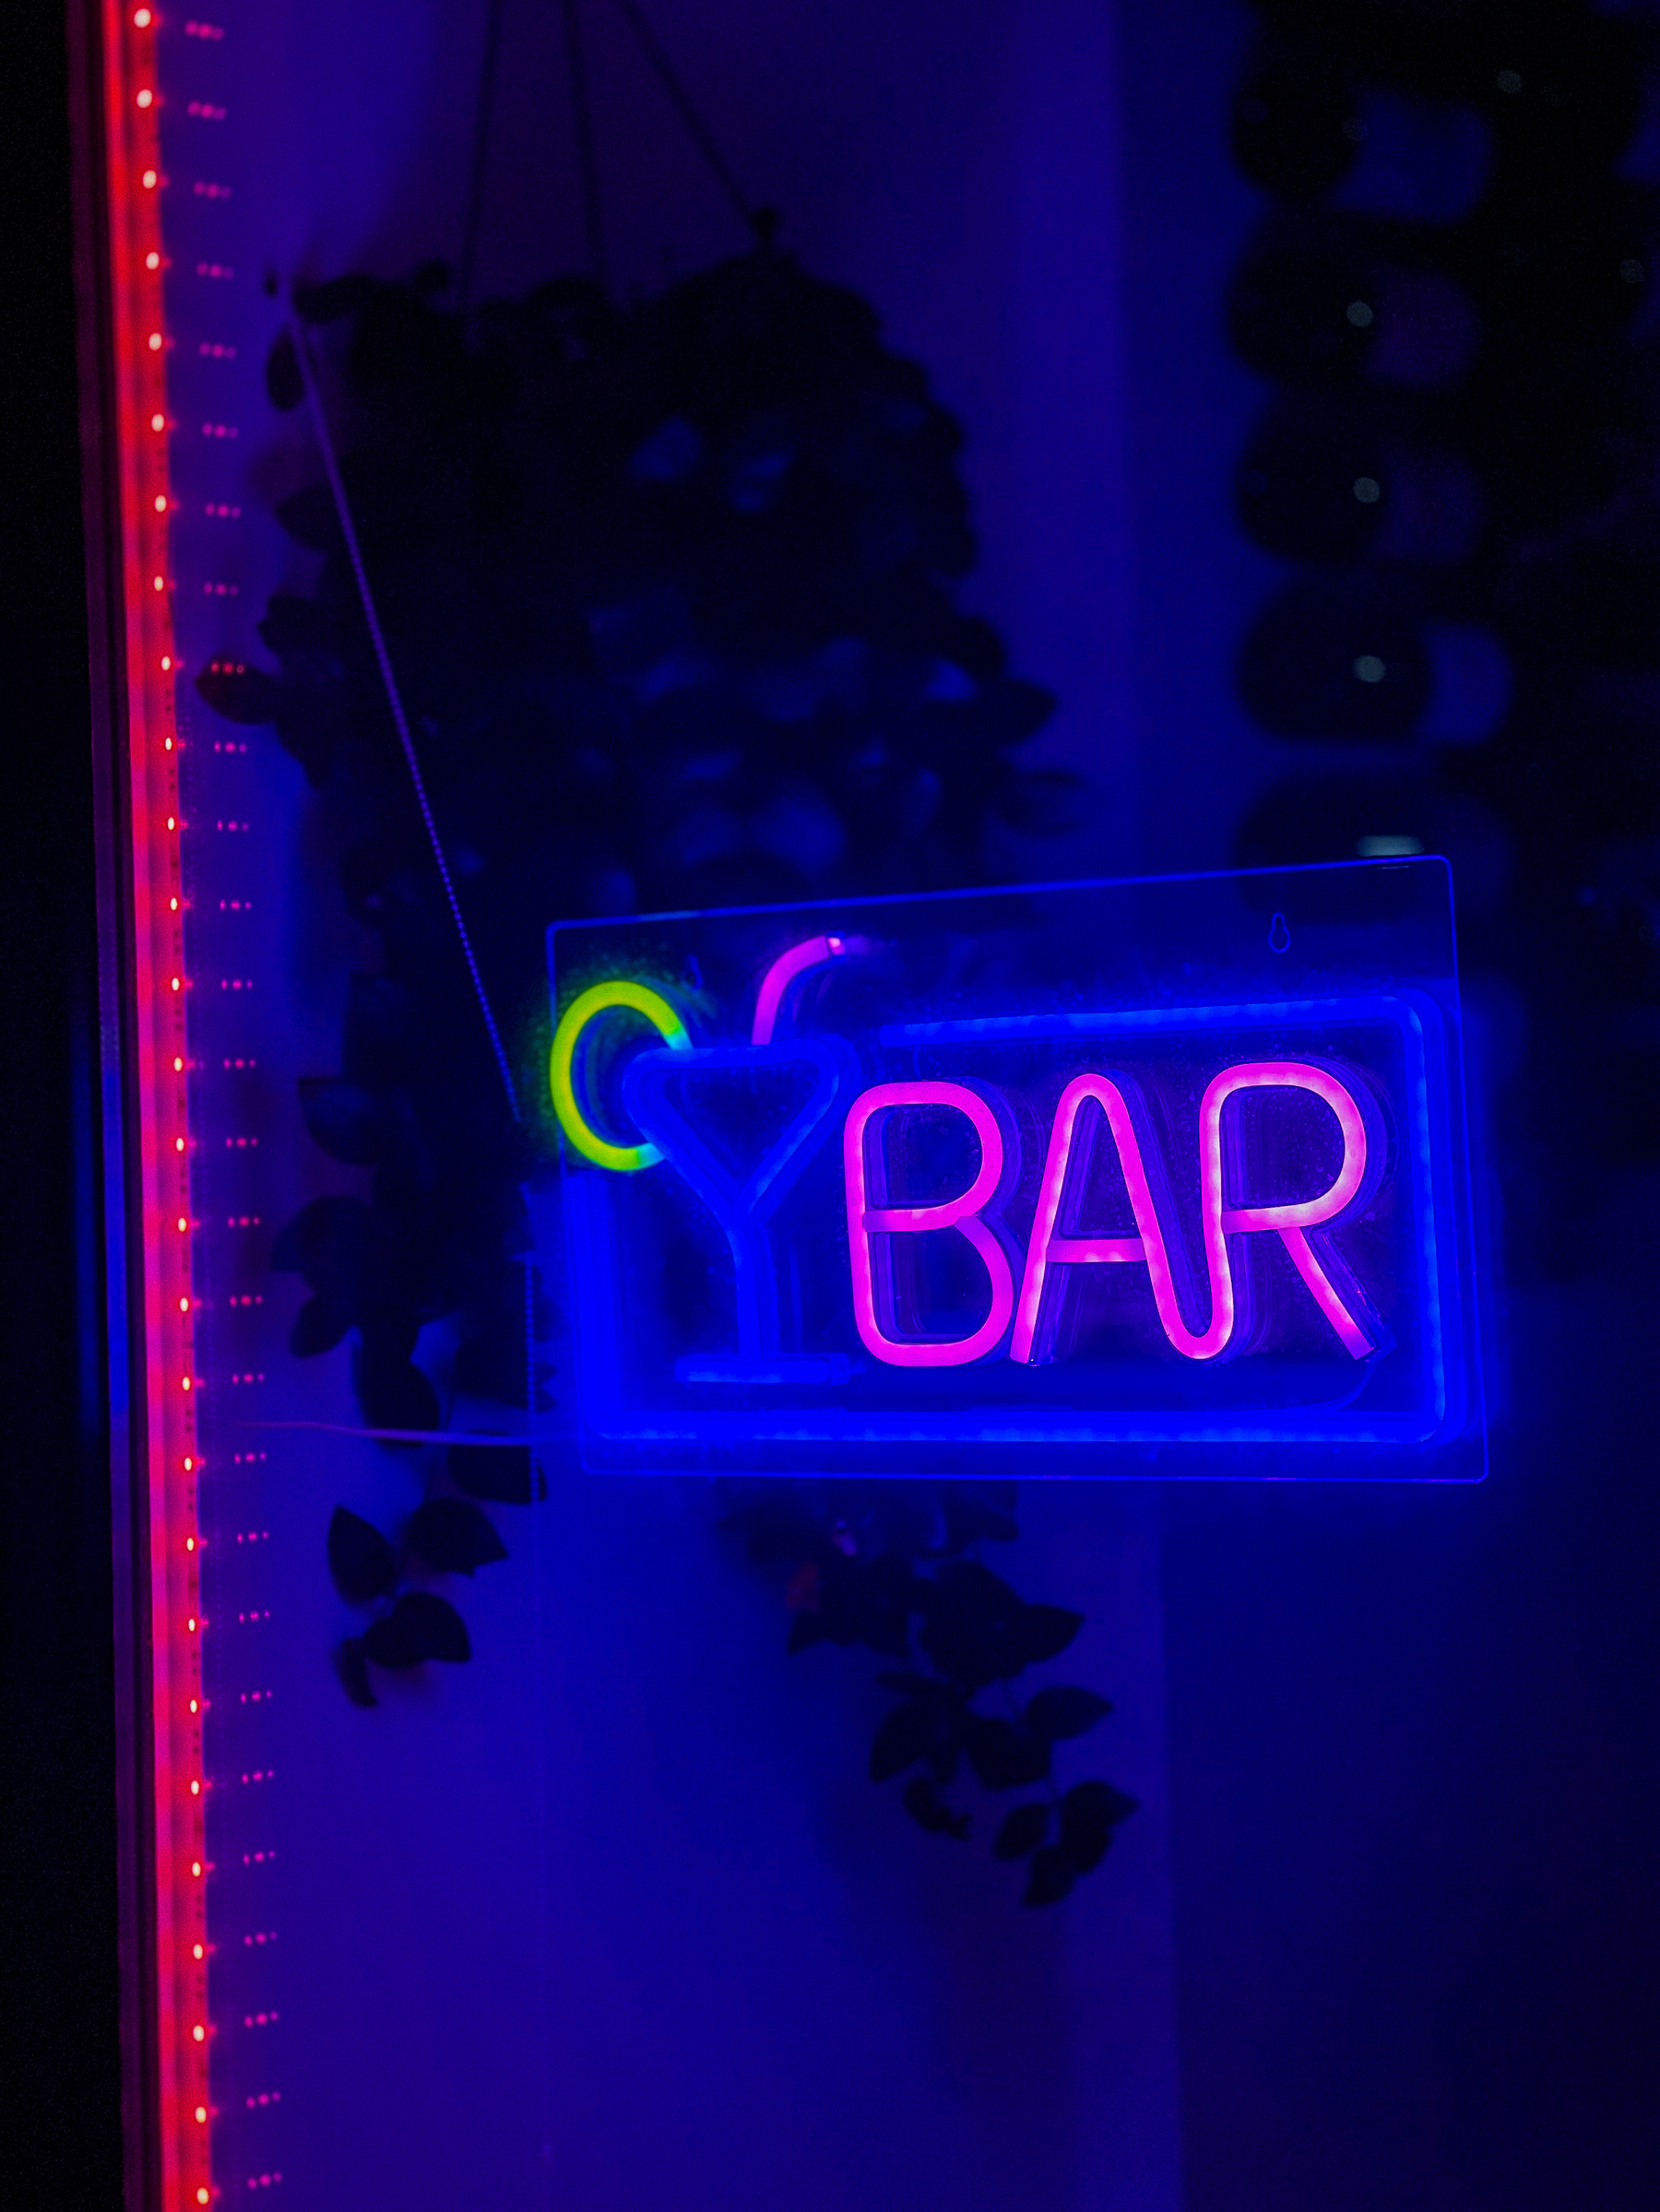 Neon sign reading &ldquo;BAR&rdquo; in pink and blue colors, hung on a window with red LED strip lighting along the edge and a silhouette of hanging foliage in the background.